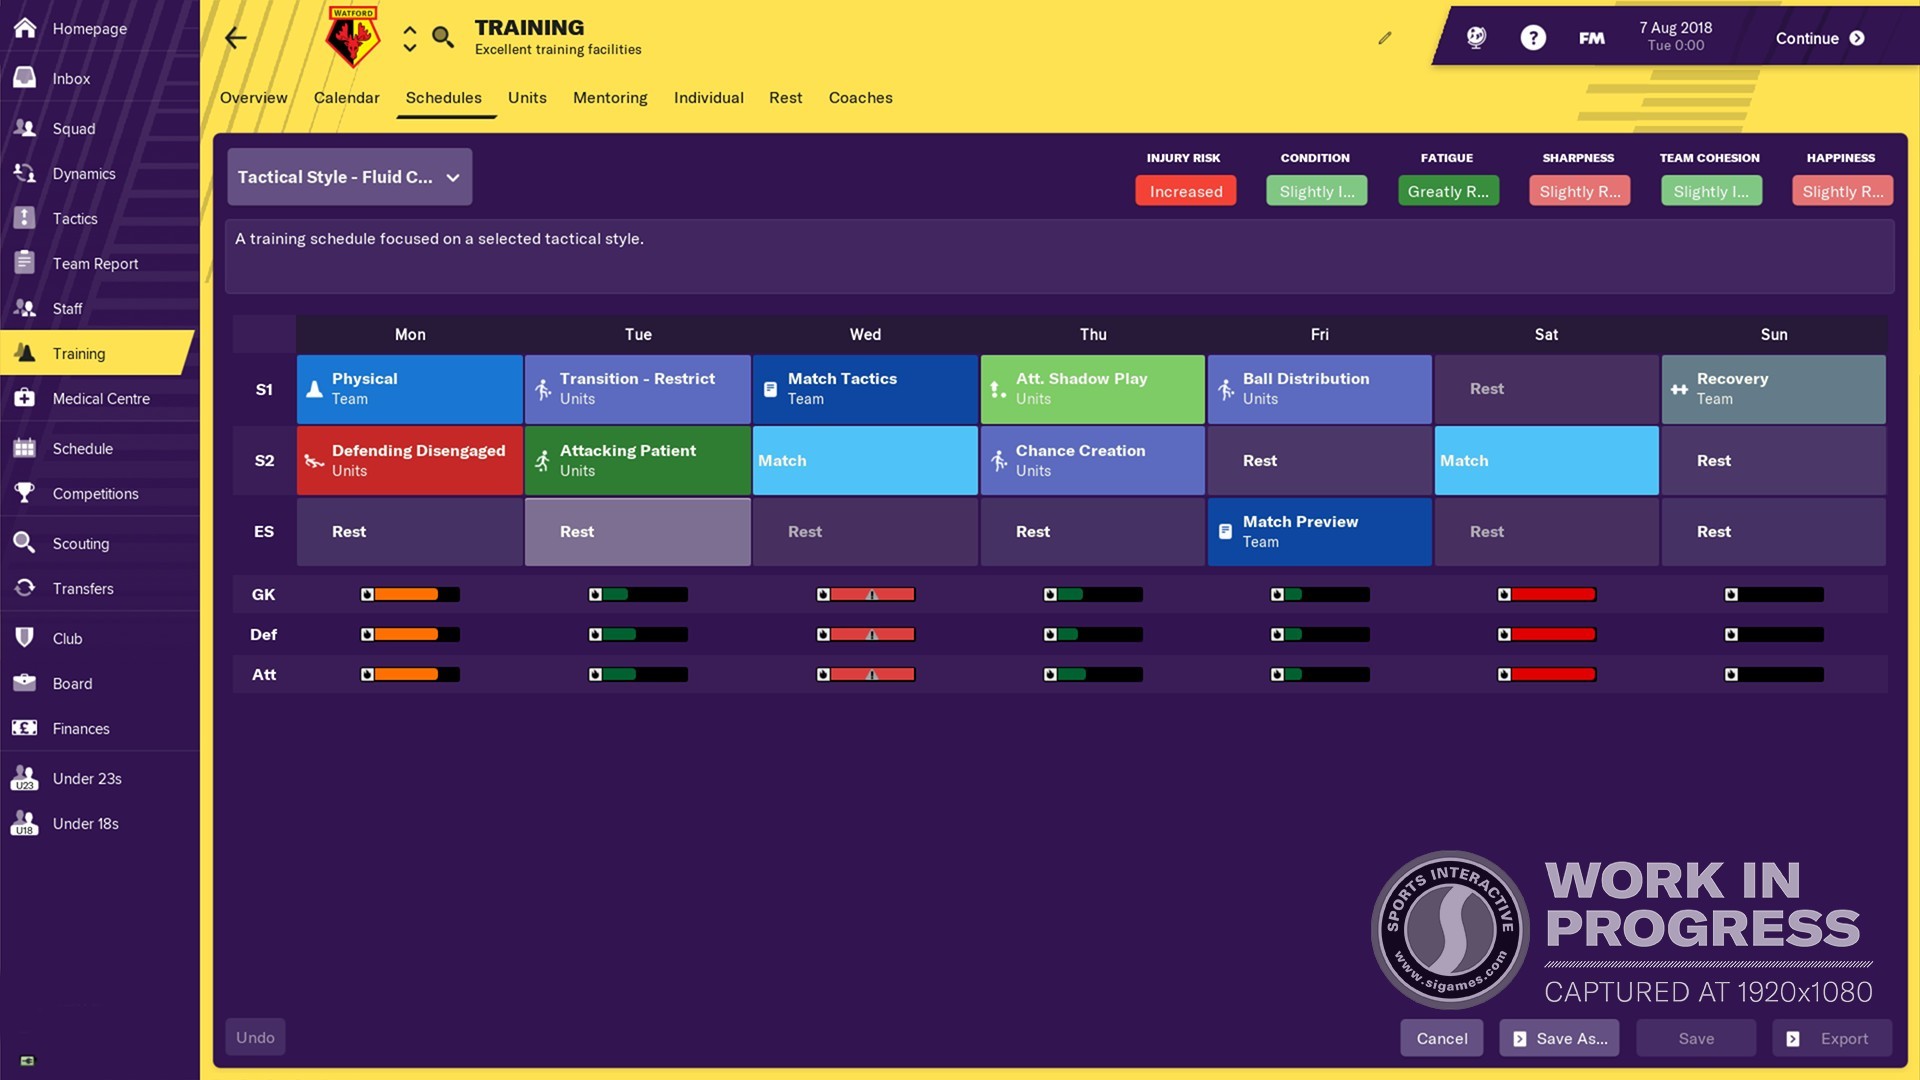 football manager 2019 where to buy